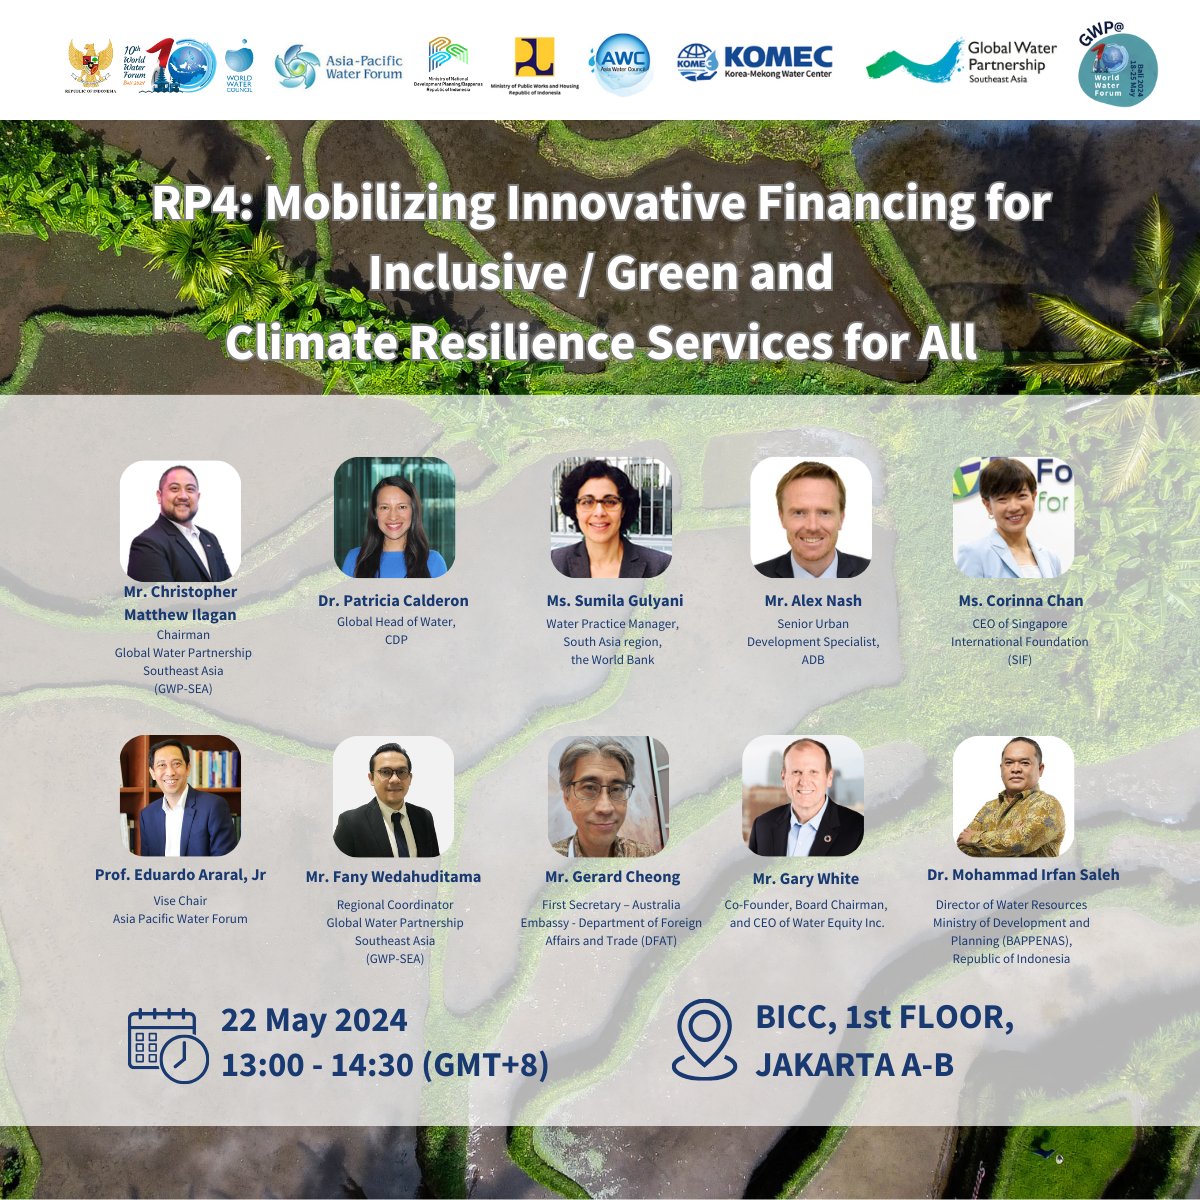 We're also pooling expertise to catalyze financing and innovation for the water sector. Make sure to connect with us in an engaging discussion on crafting strategic directions and customizable roadmaps. #WorldWaterForum #WaterforSharedProsperity #WaterFinance